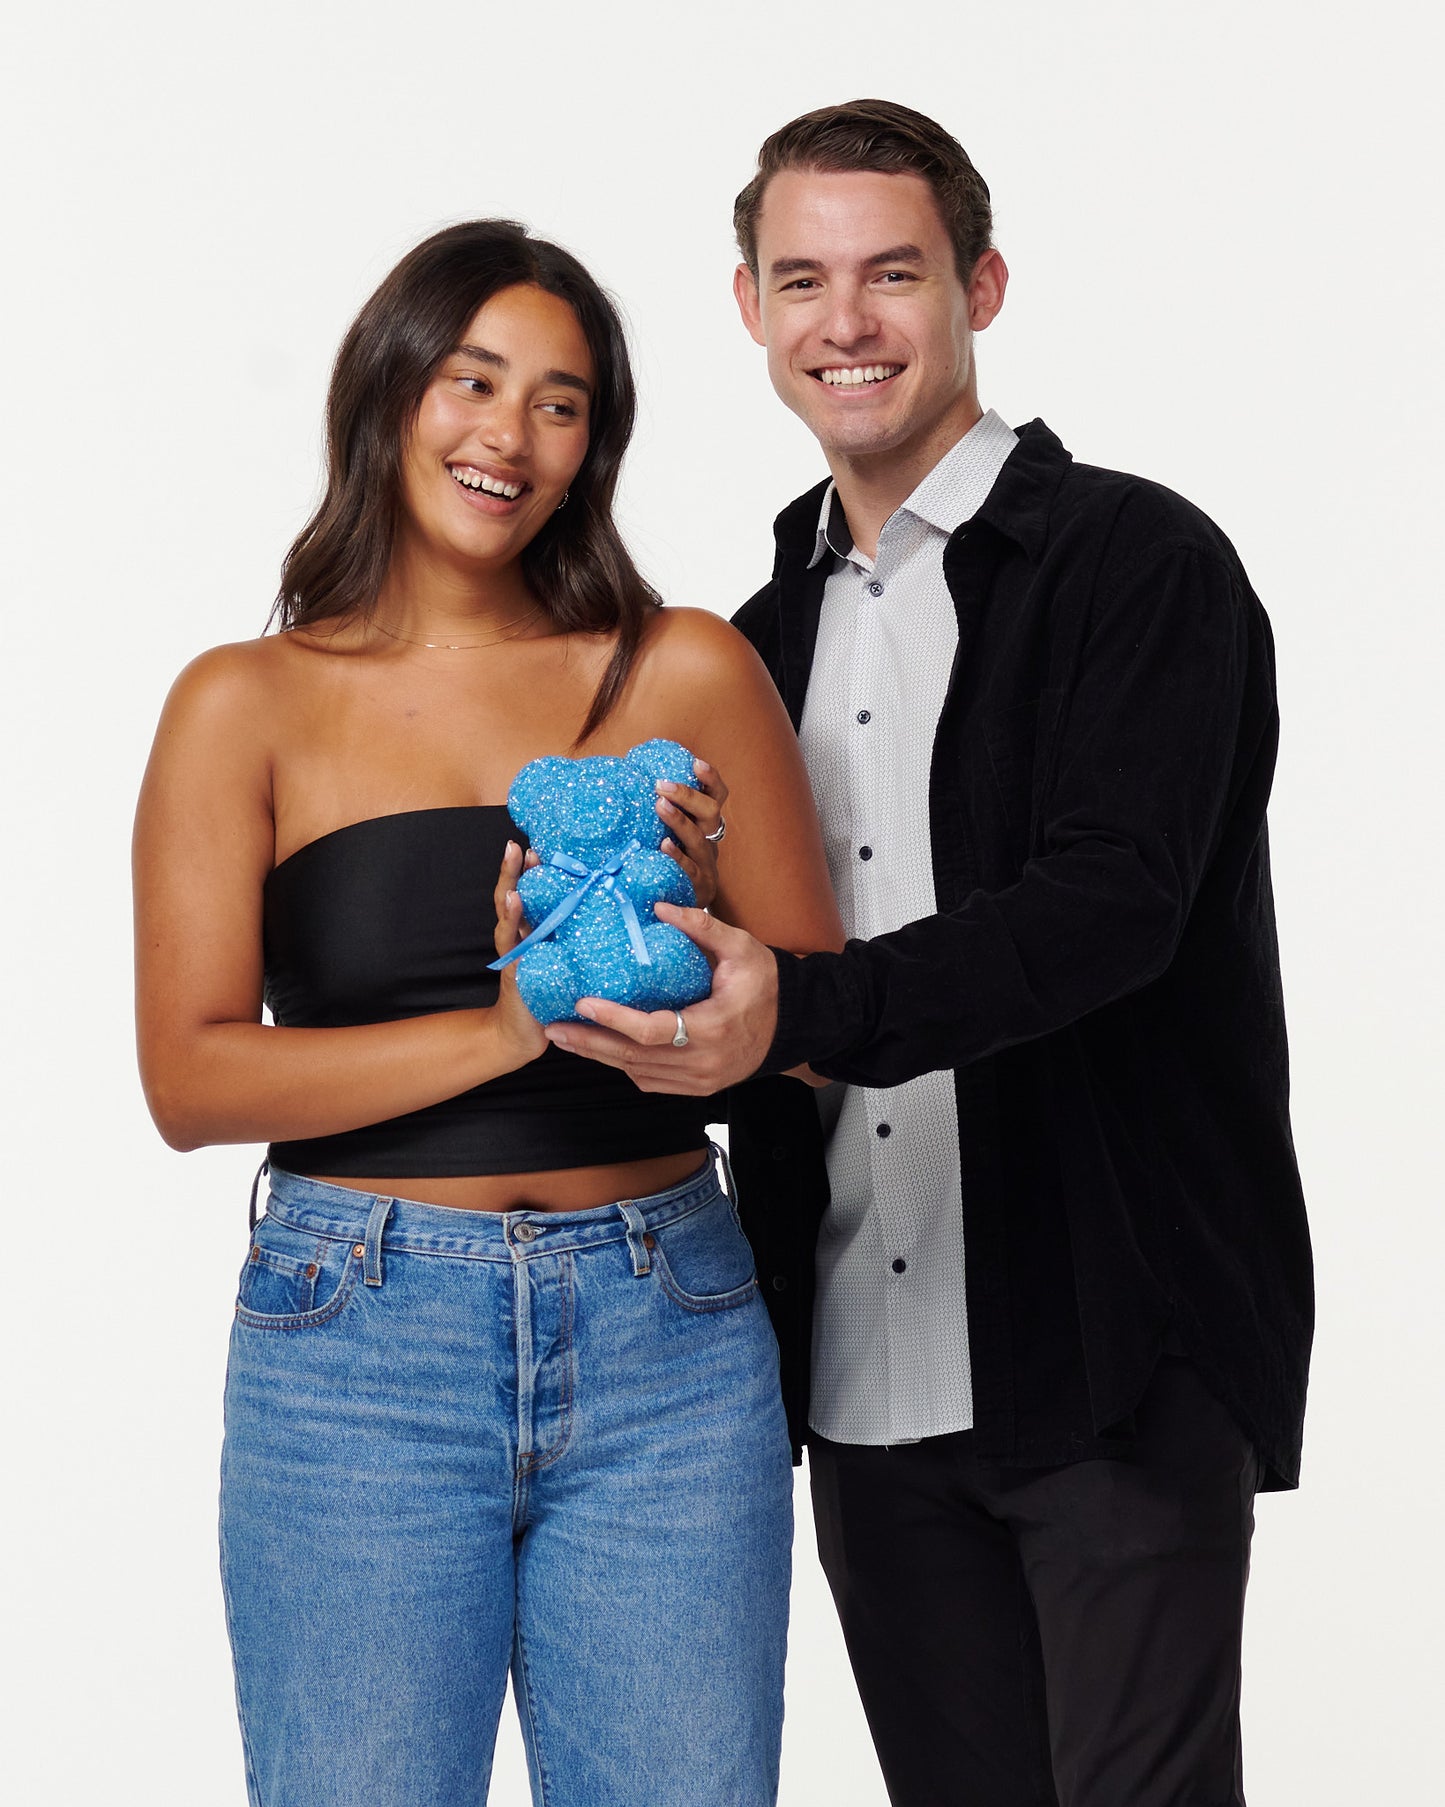 A male model giving a female model the crystal bear product as a gift